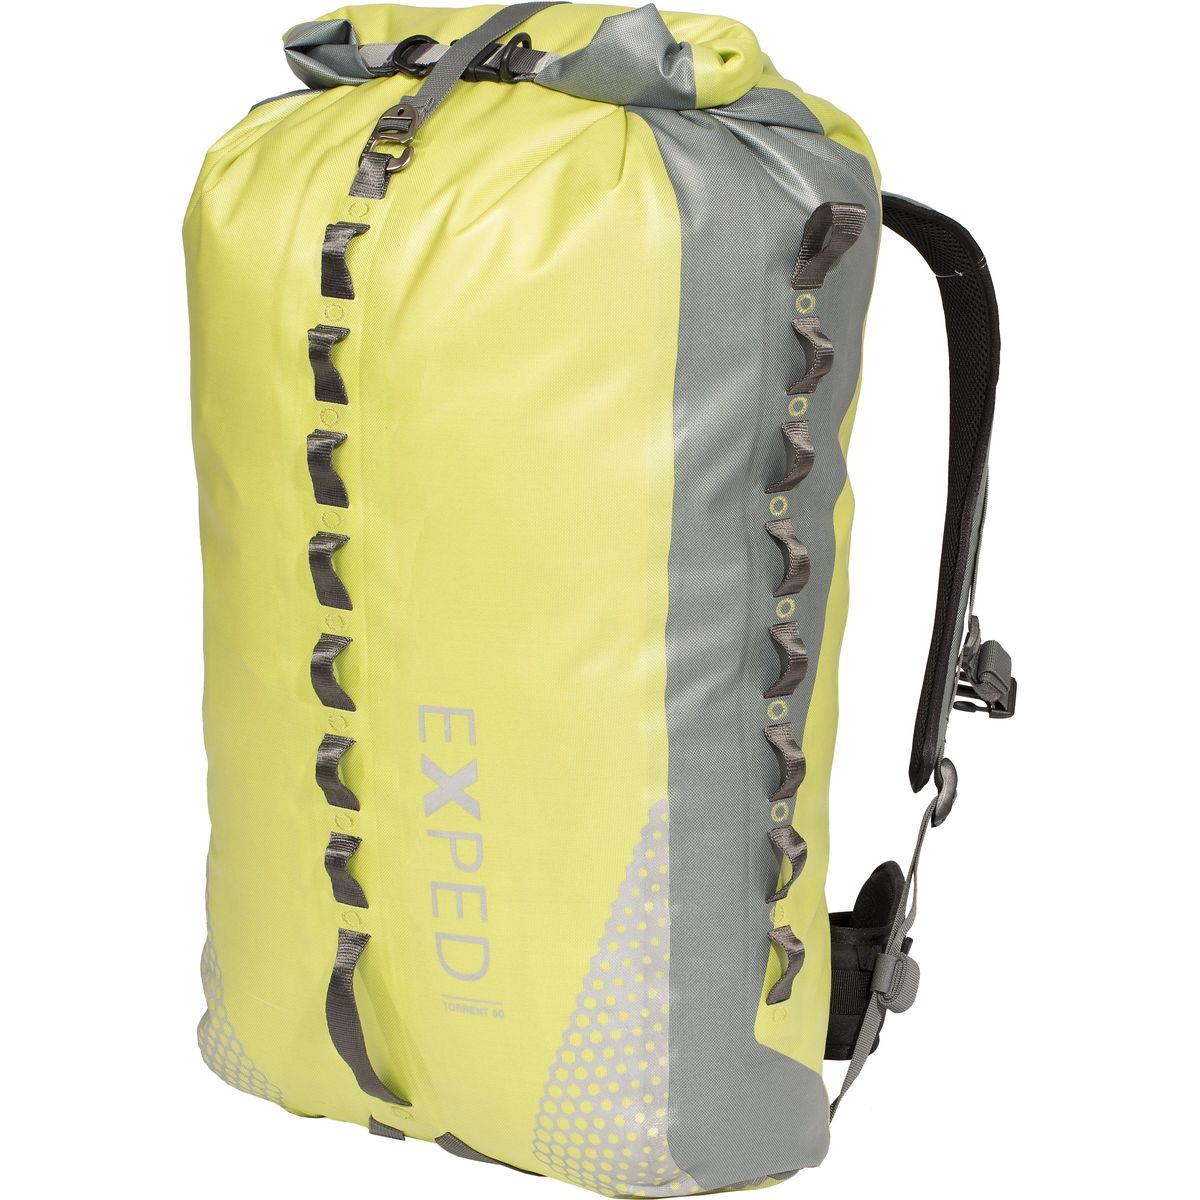 Exped Torrent 50 Backpack - 3051cu in | Backcountry.com